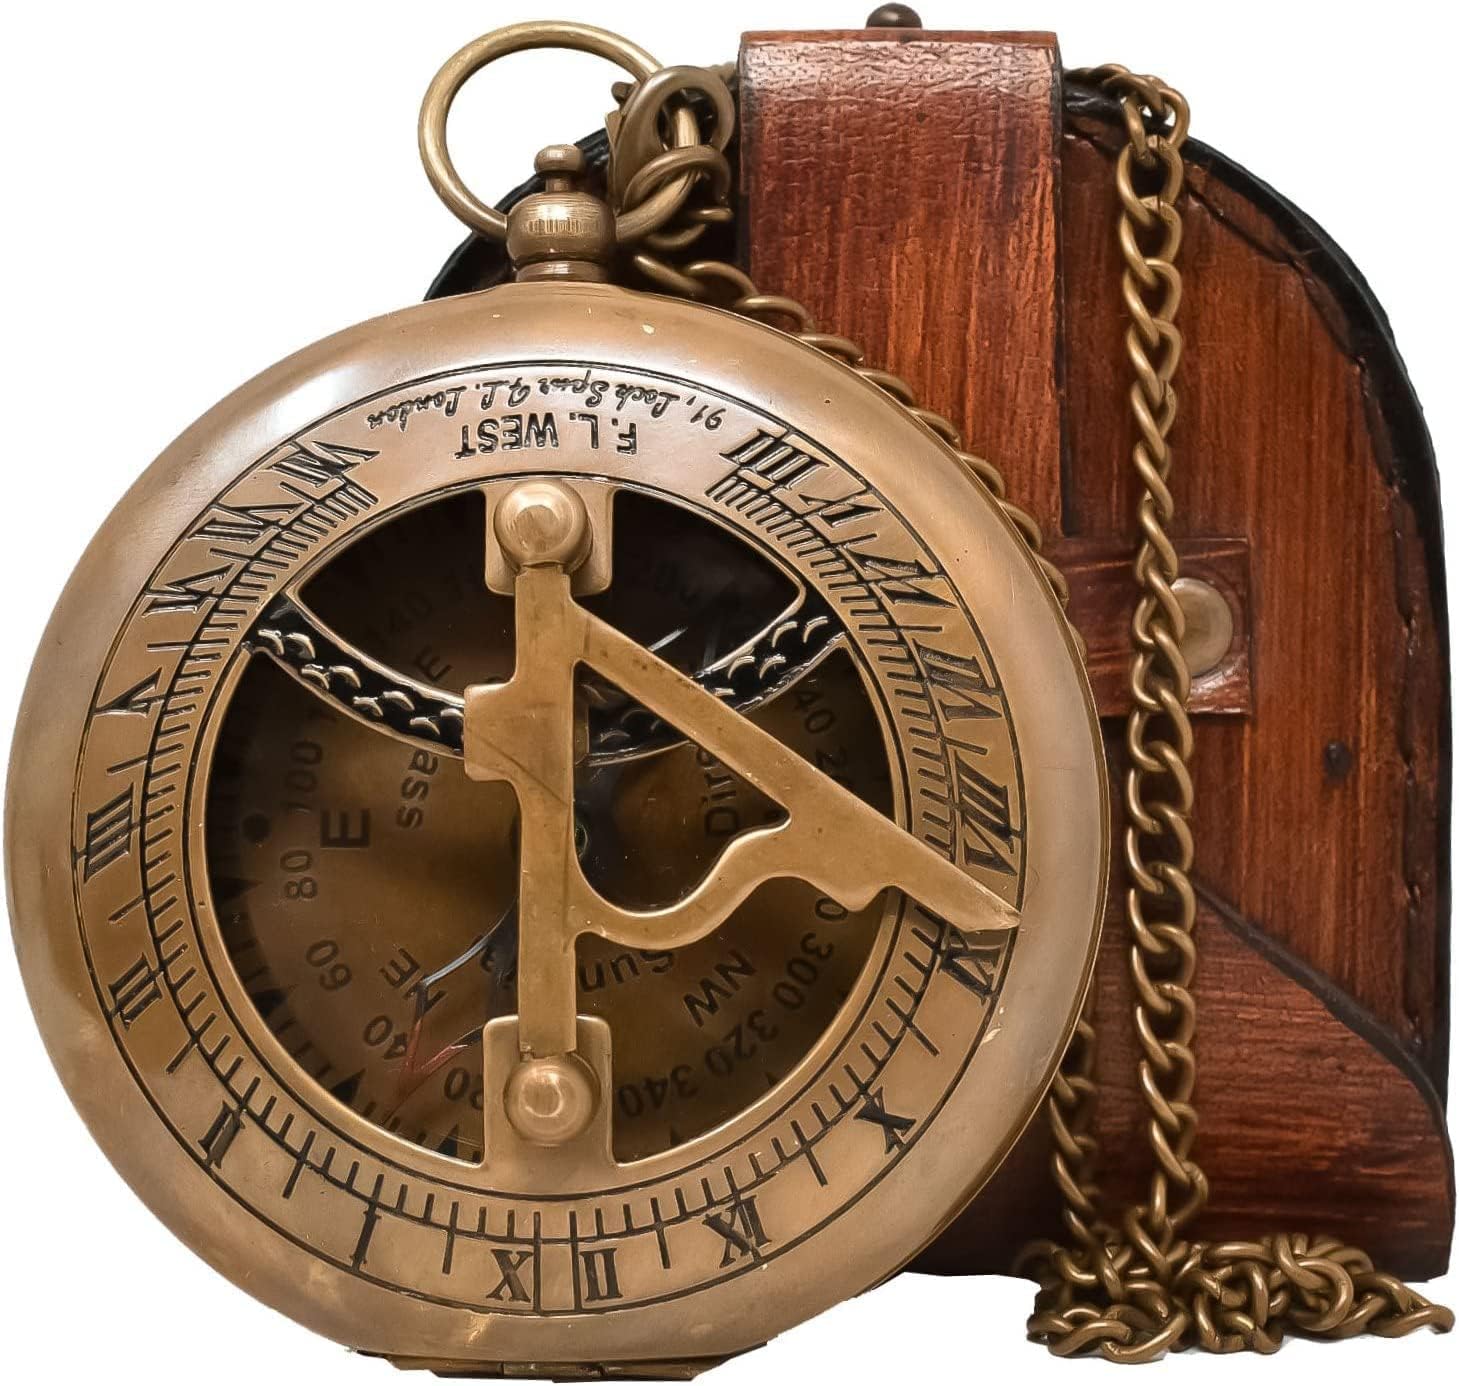 Brass Sundial Compass Unique Gift for Men with Leather Case and Chain - Push Open Compas Vintage Steampunk Accessory - Sundial Clock- Handmade Gift